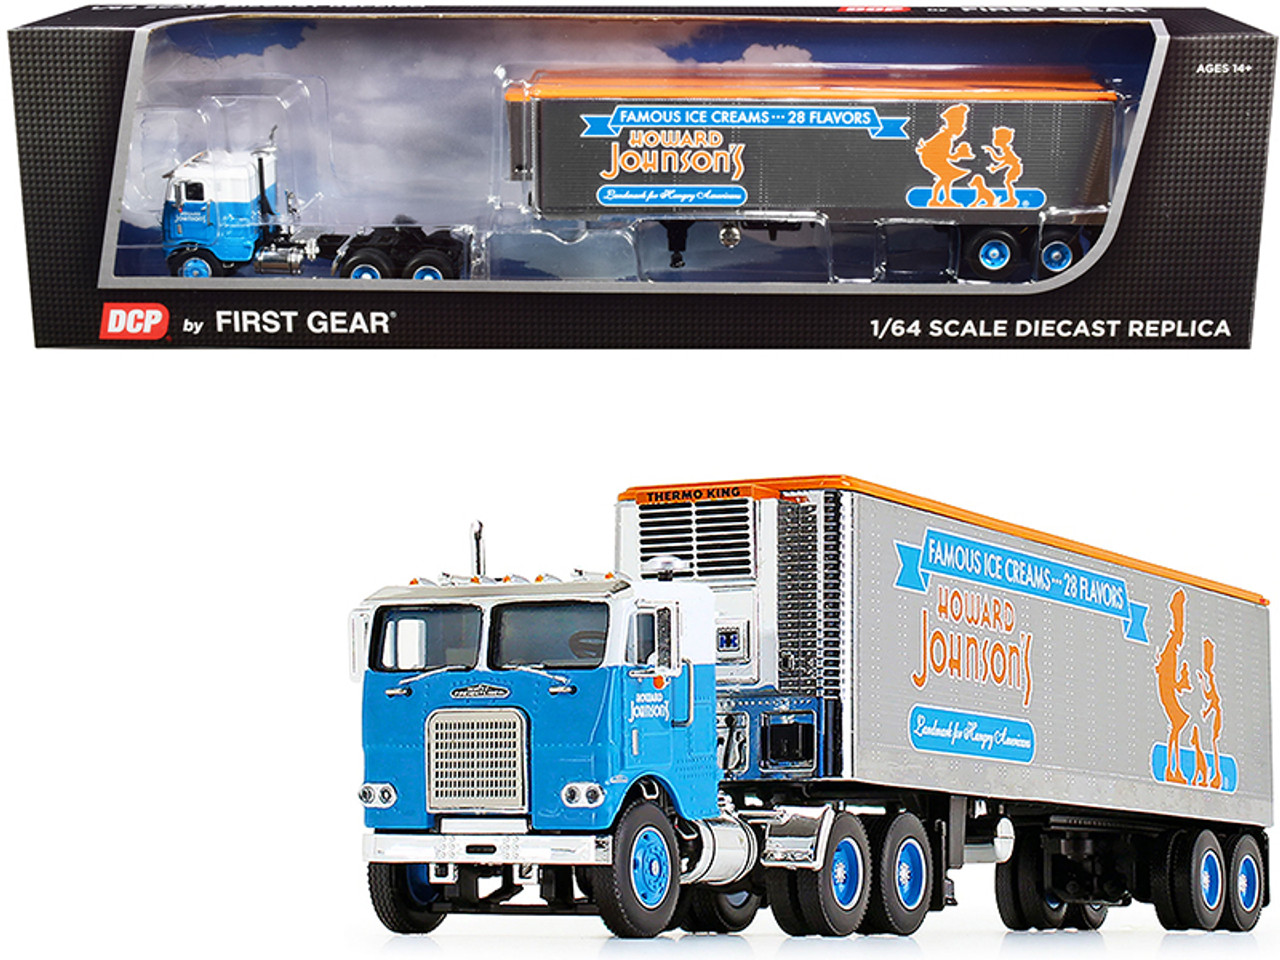 White Freightliner COE with 40' Vintage Reefer Refrigerated Trailer "Howard Johnson's" 34th in a "Fallen Flag Series" 1/64 Diecast Model by DCP/First Gear